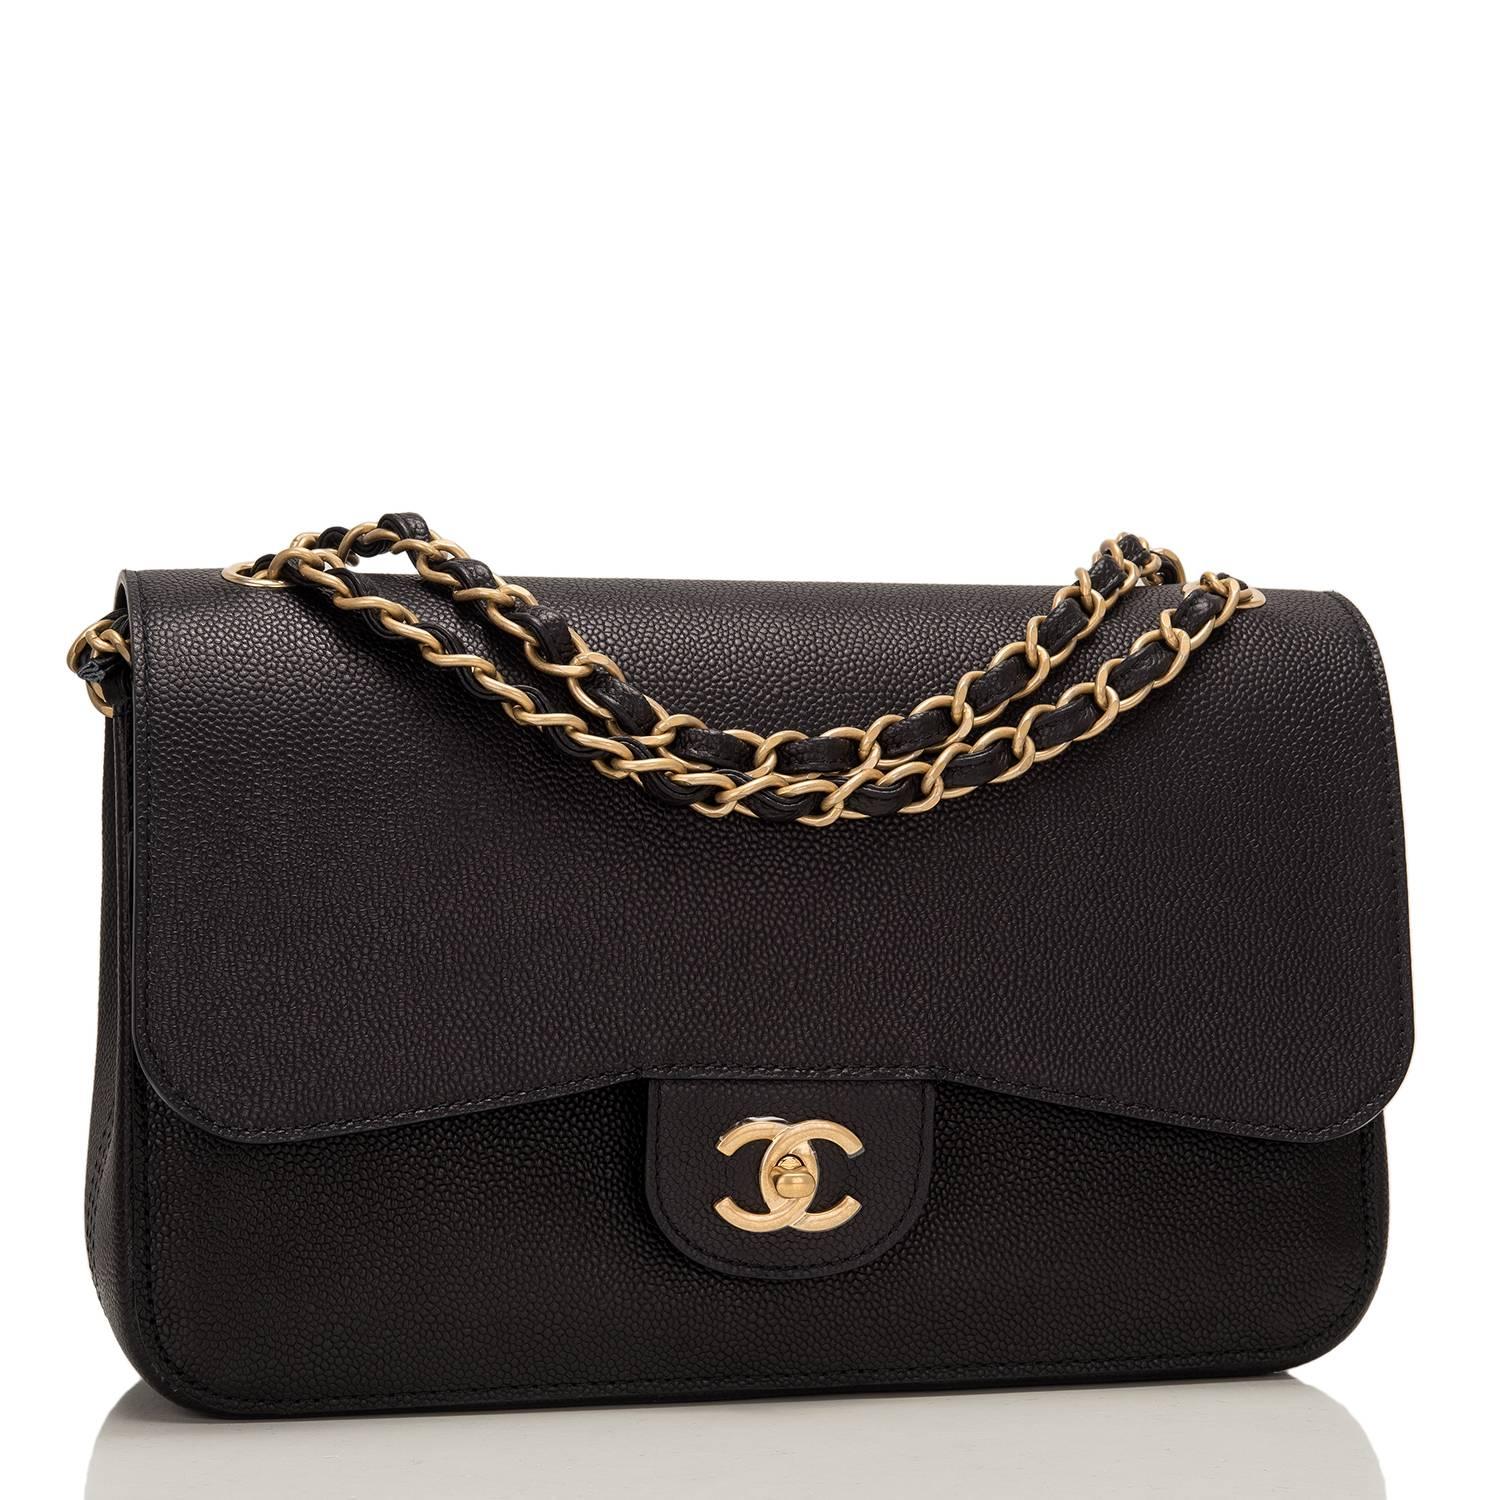 Chanel Jumbo Classic double flap bag of black caviar leather and accented with gold tone hardware.

The bag features a front flap with signature CC turnlock closure, a half moon back pocket, and an adjustable interwoven gold tone chain link and